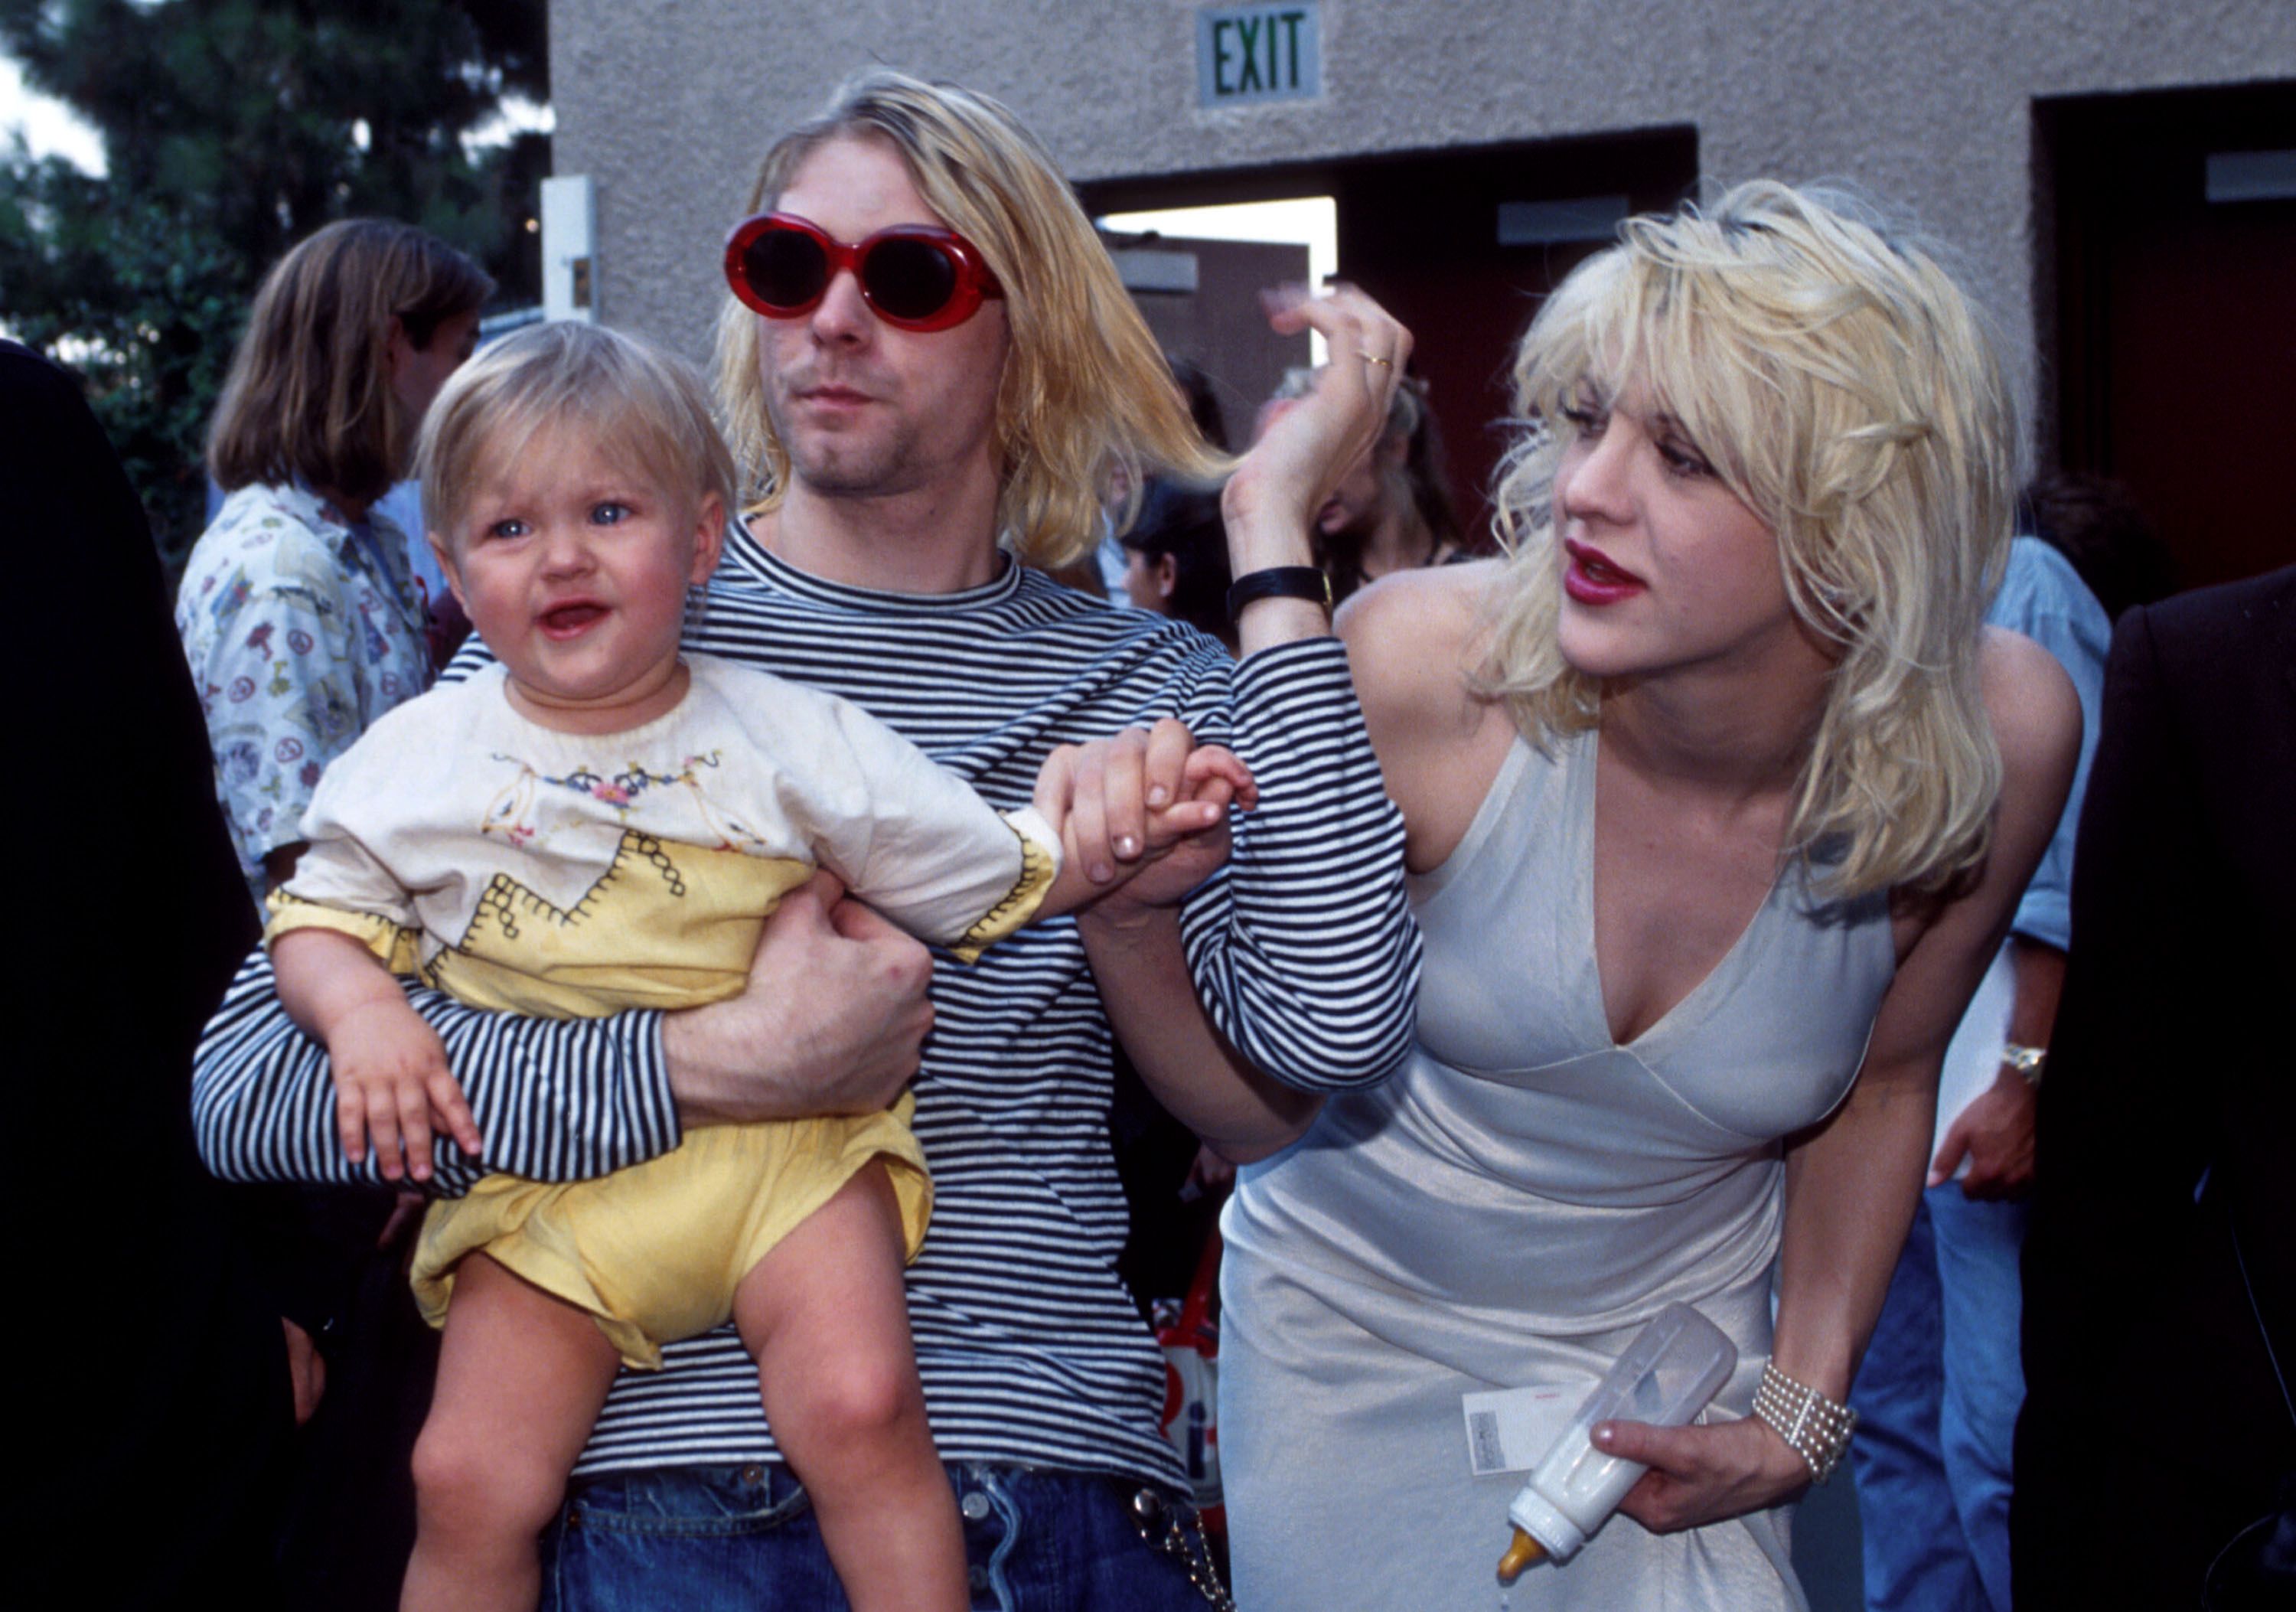 Kurt Cobain of Nirvana with Courtney Love and daughter Frances Bean Cobain at the MTV Video Music Awards  in 1993 in Universal City, California | Source: Getty Images